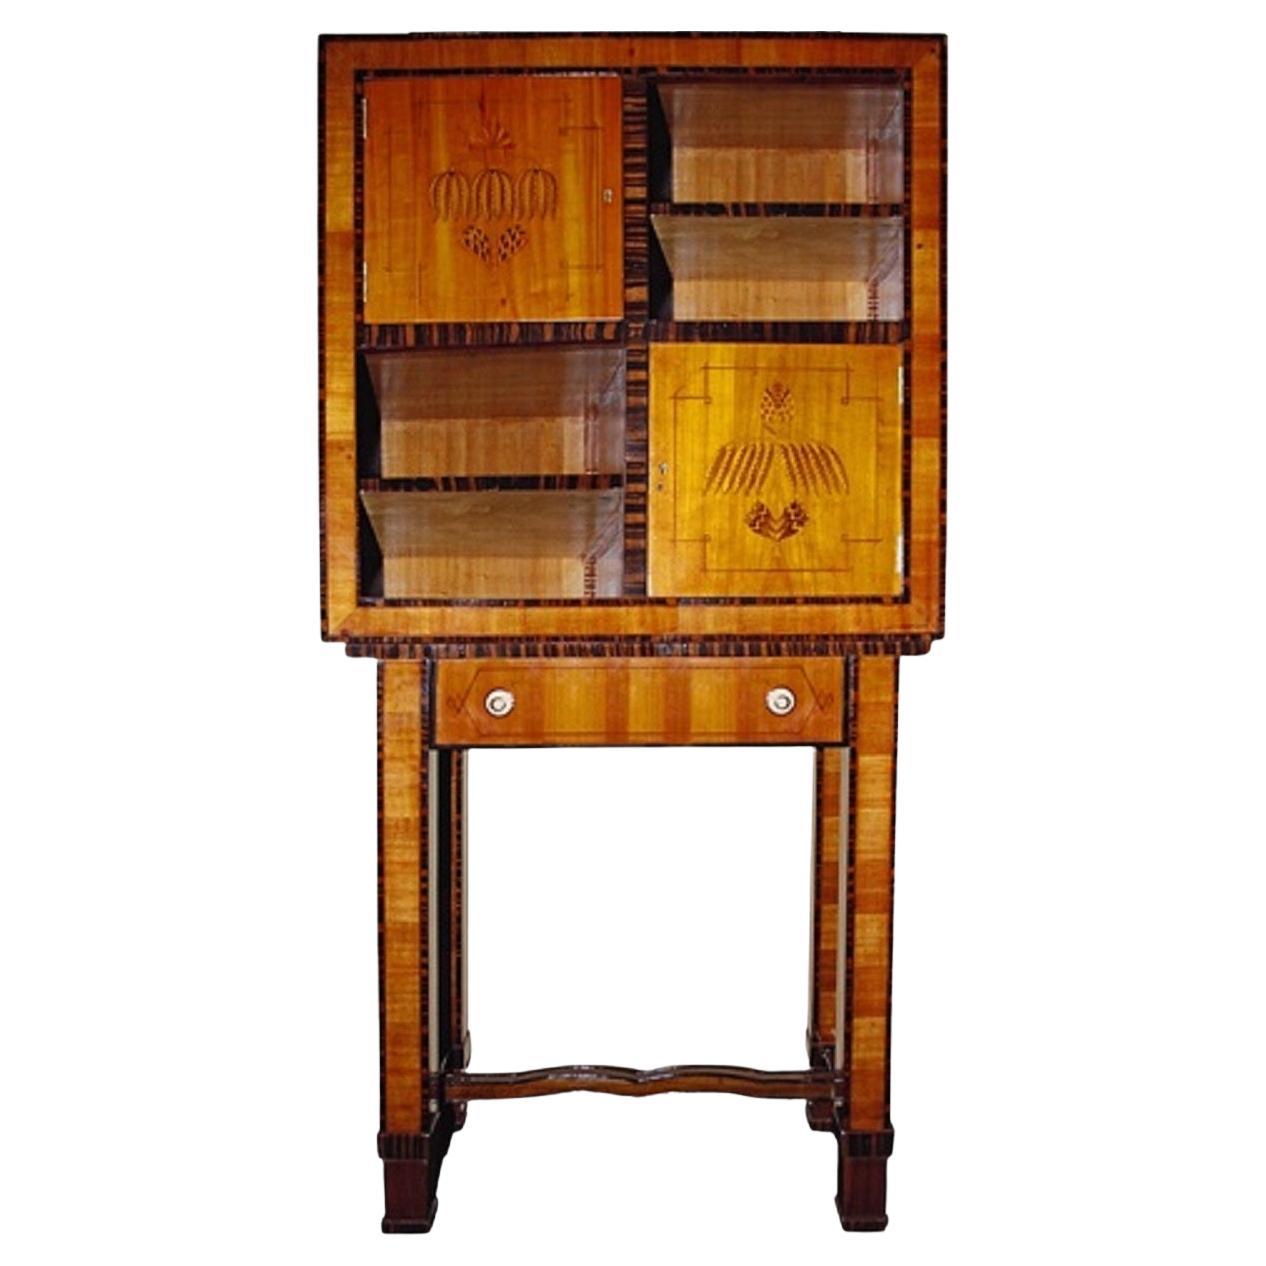 Furniture for Havana Cigars, Puros, Attributed to Koloman Moser and Werkstatte For Sale